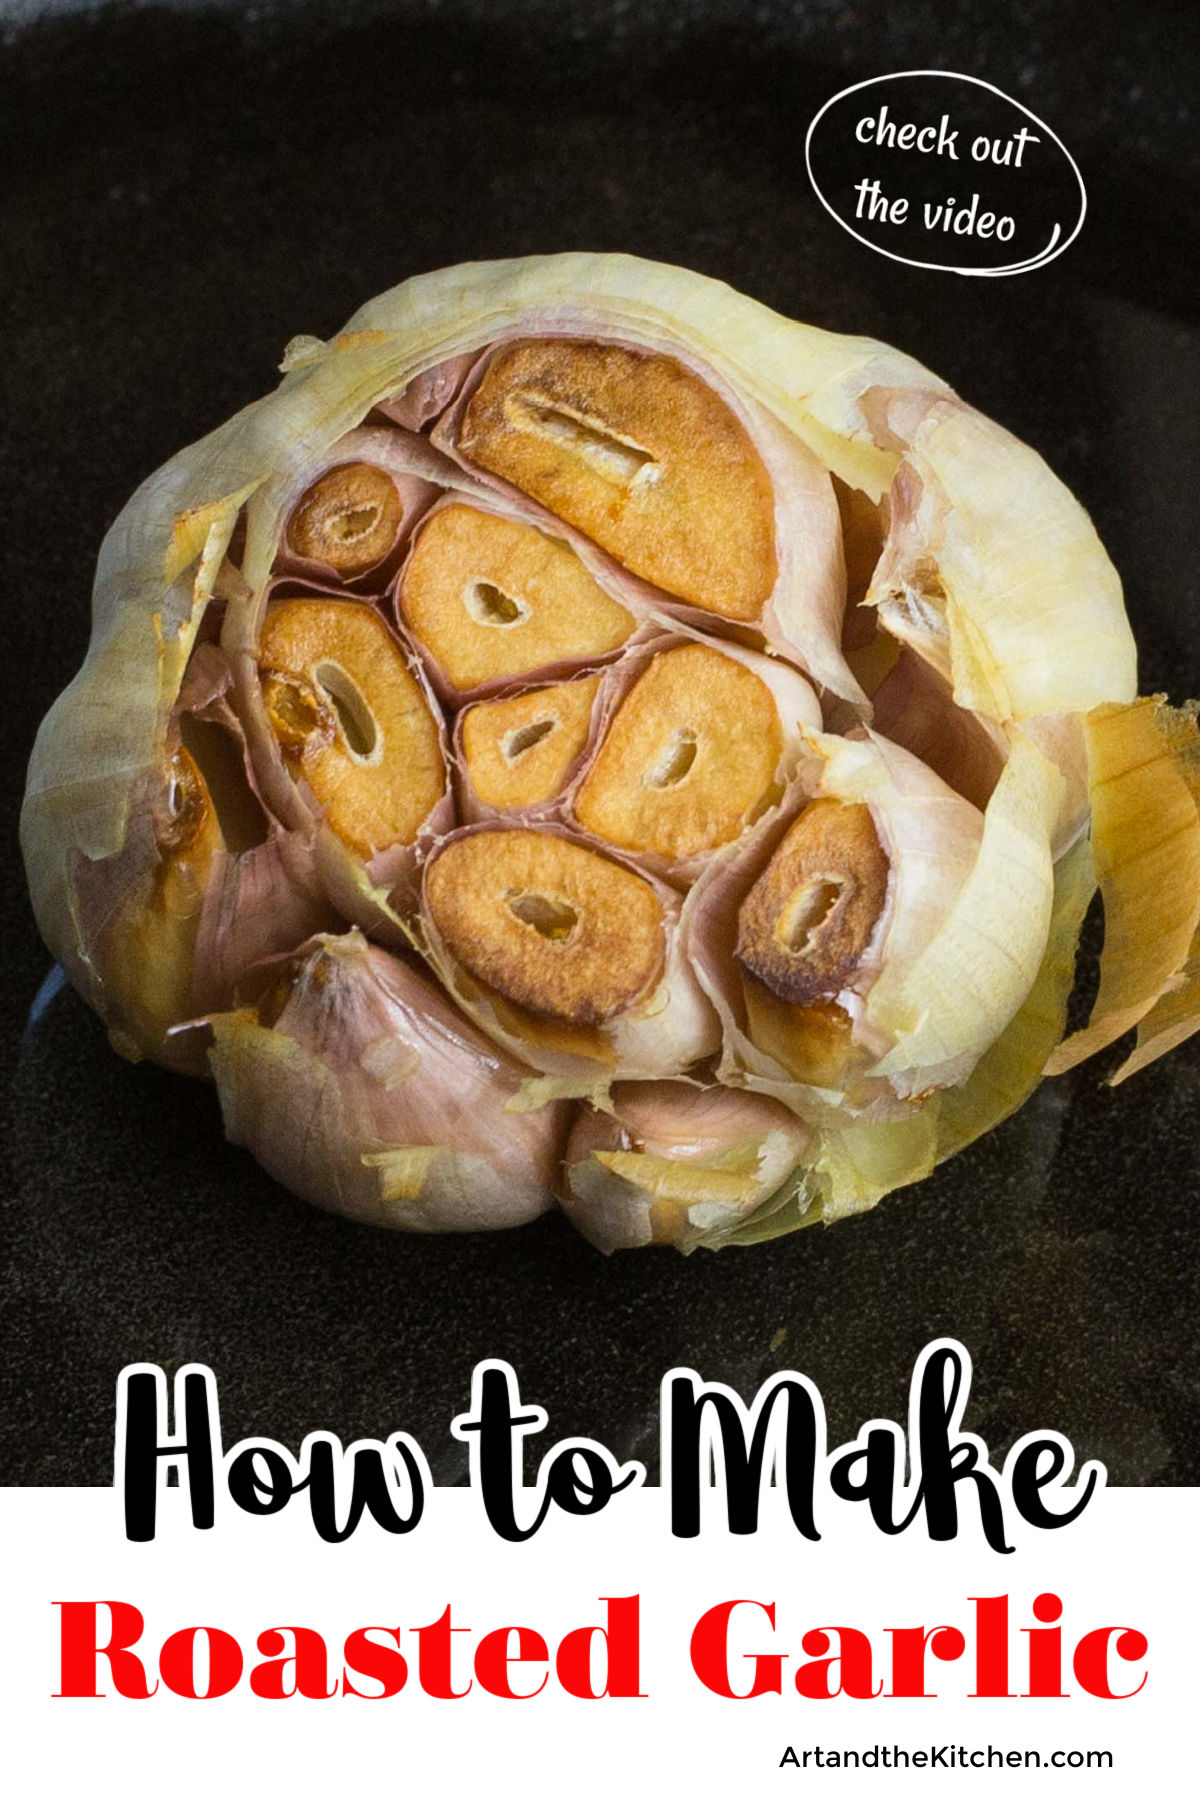 Easy to follow steps on how to make savory roasted garlic. Caramelized garlic adds sensational flavor to so many recipes. A snap to make and ready in 30 minutes! via @artandthekitch